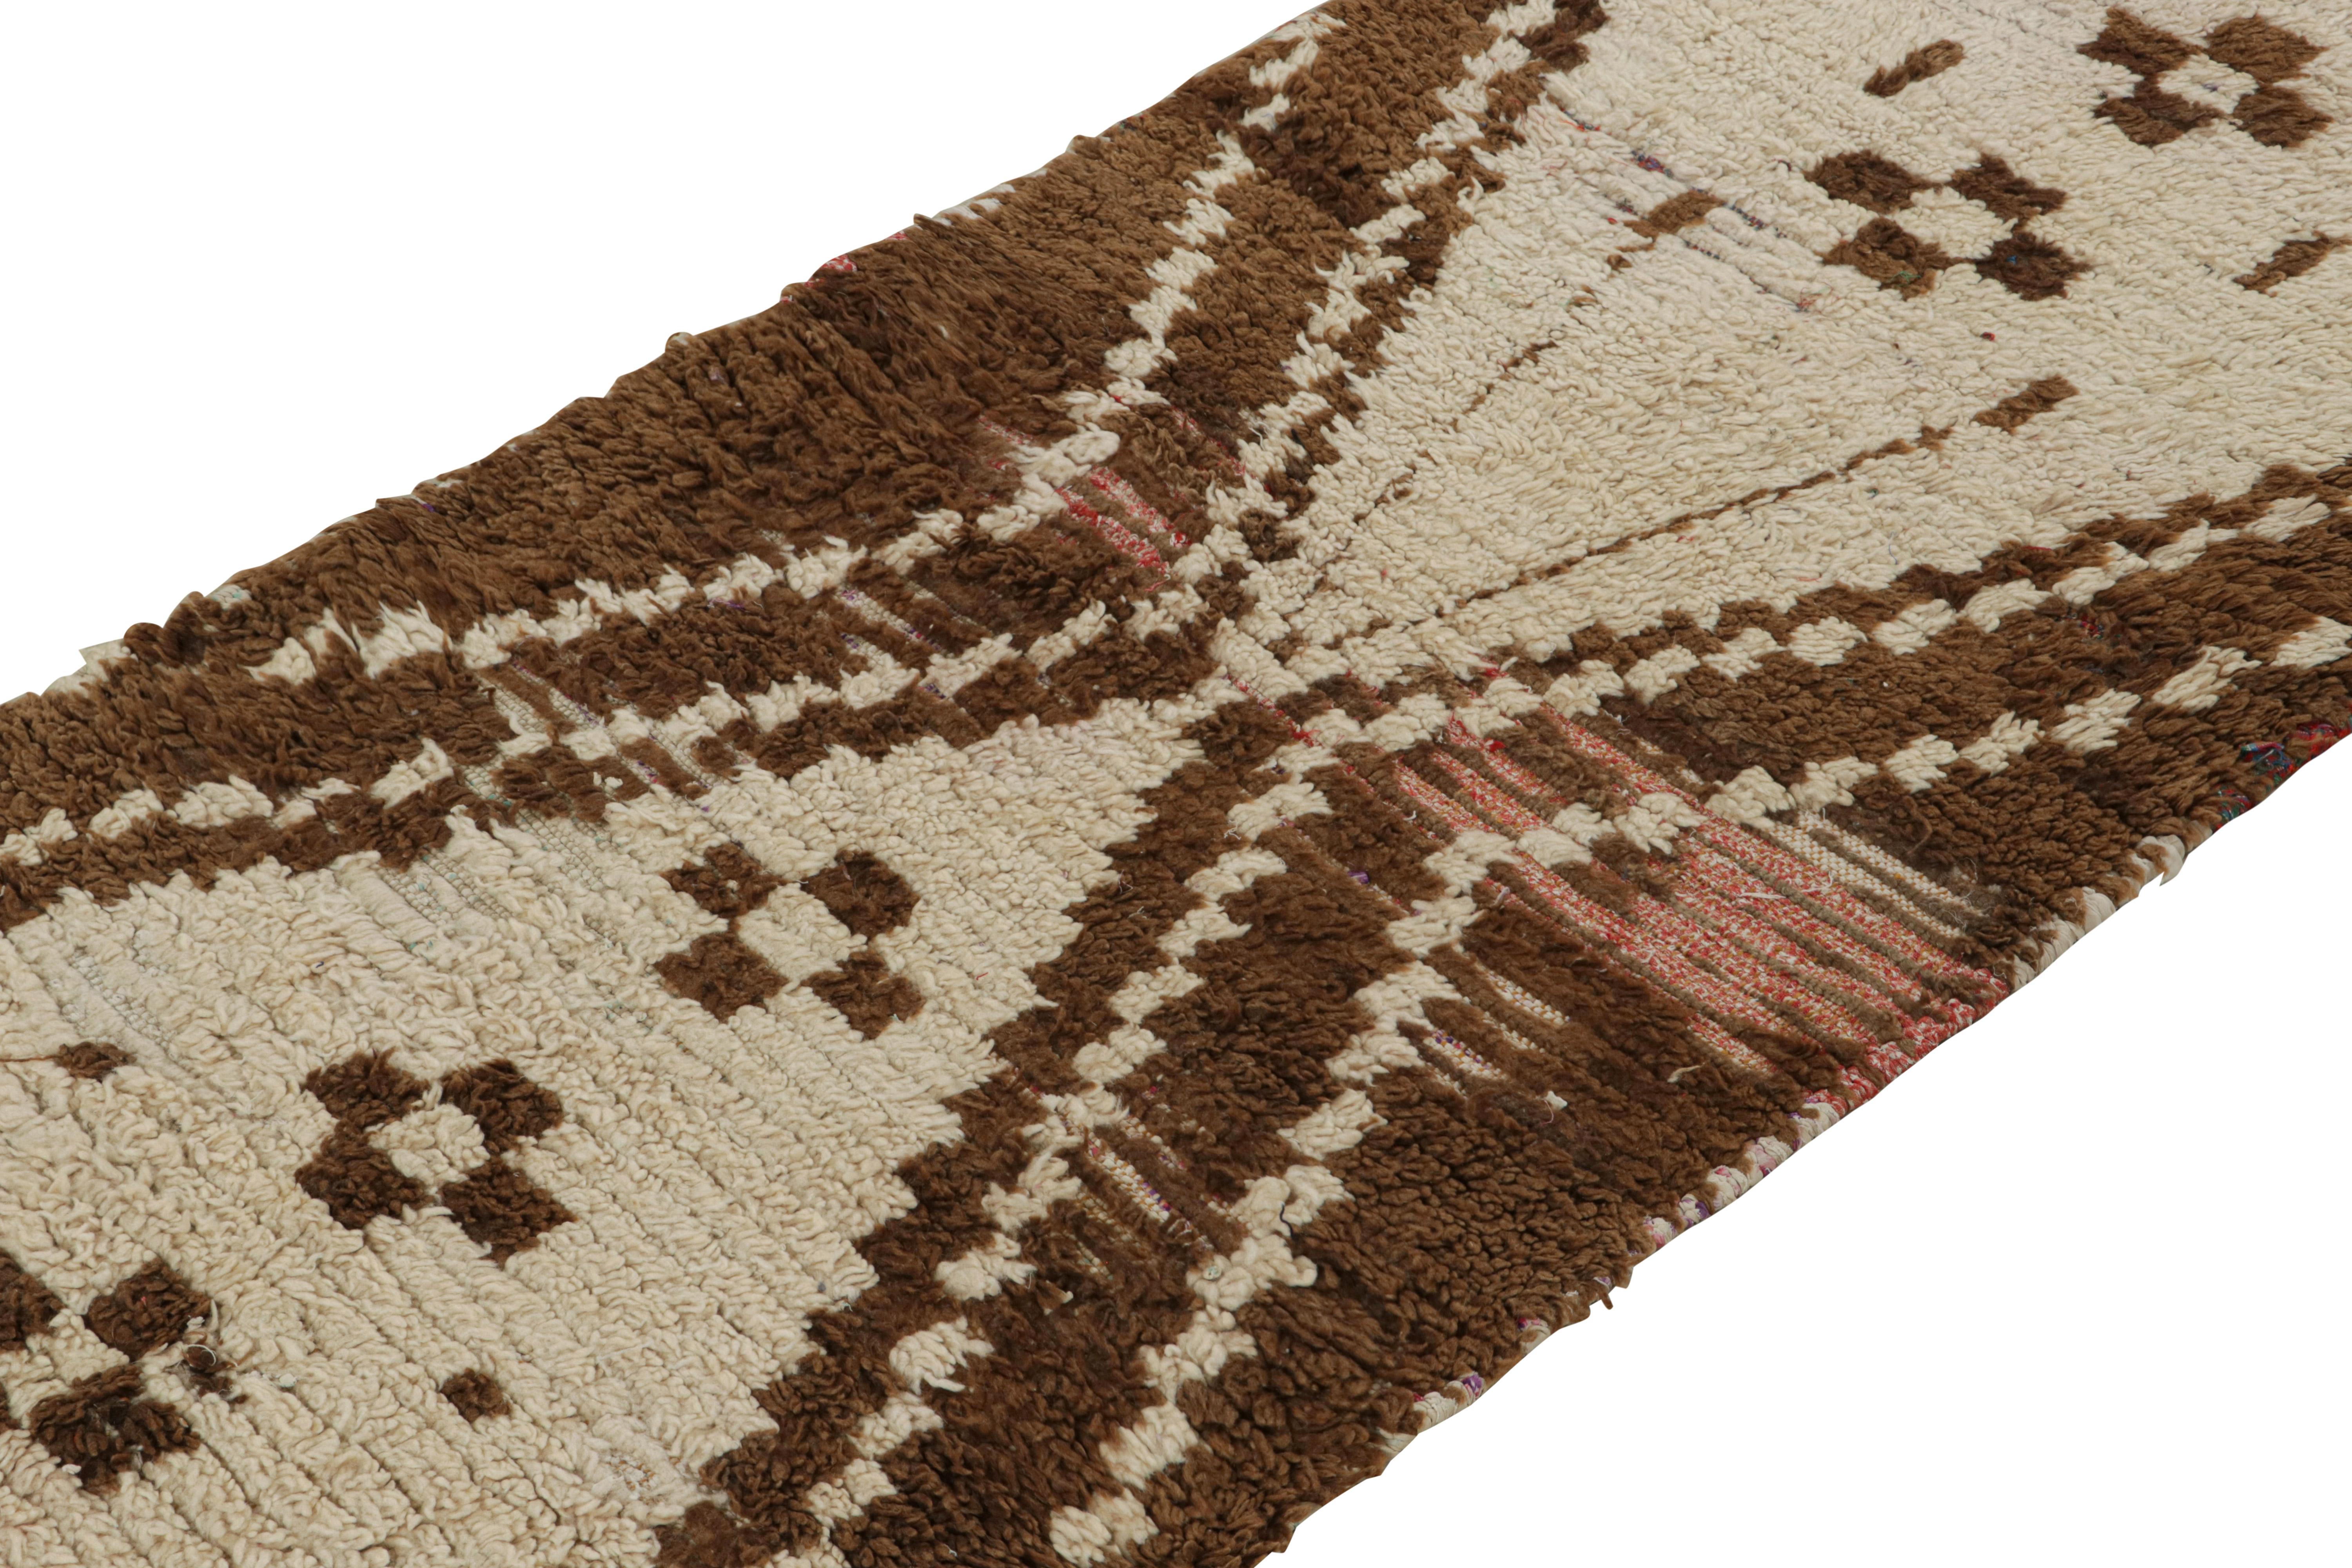 1950s Azilal Moroccan runner rug in Beige-Brown Tribal Patterns by Rug & Kilim In Good Condition For Sale In Long Island City, NY